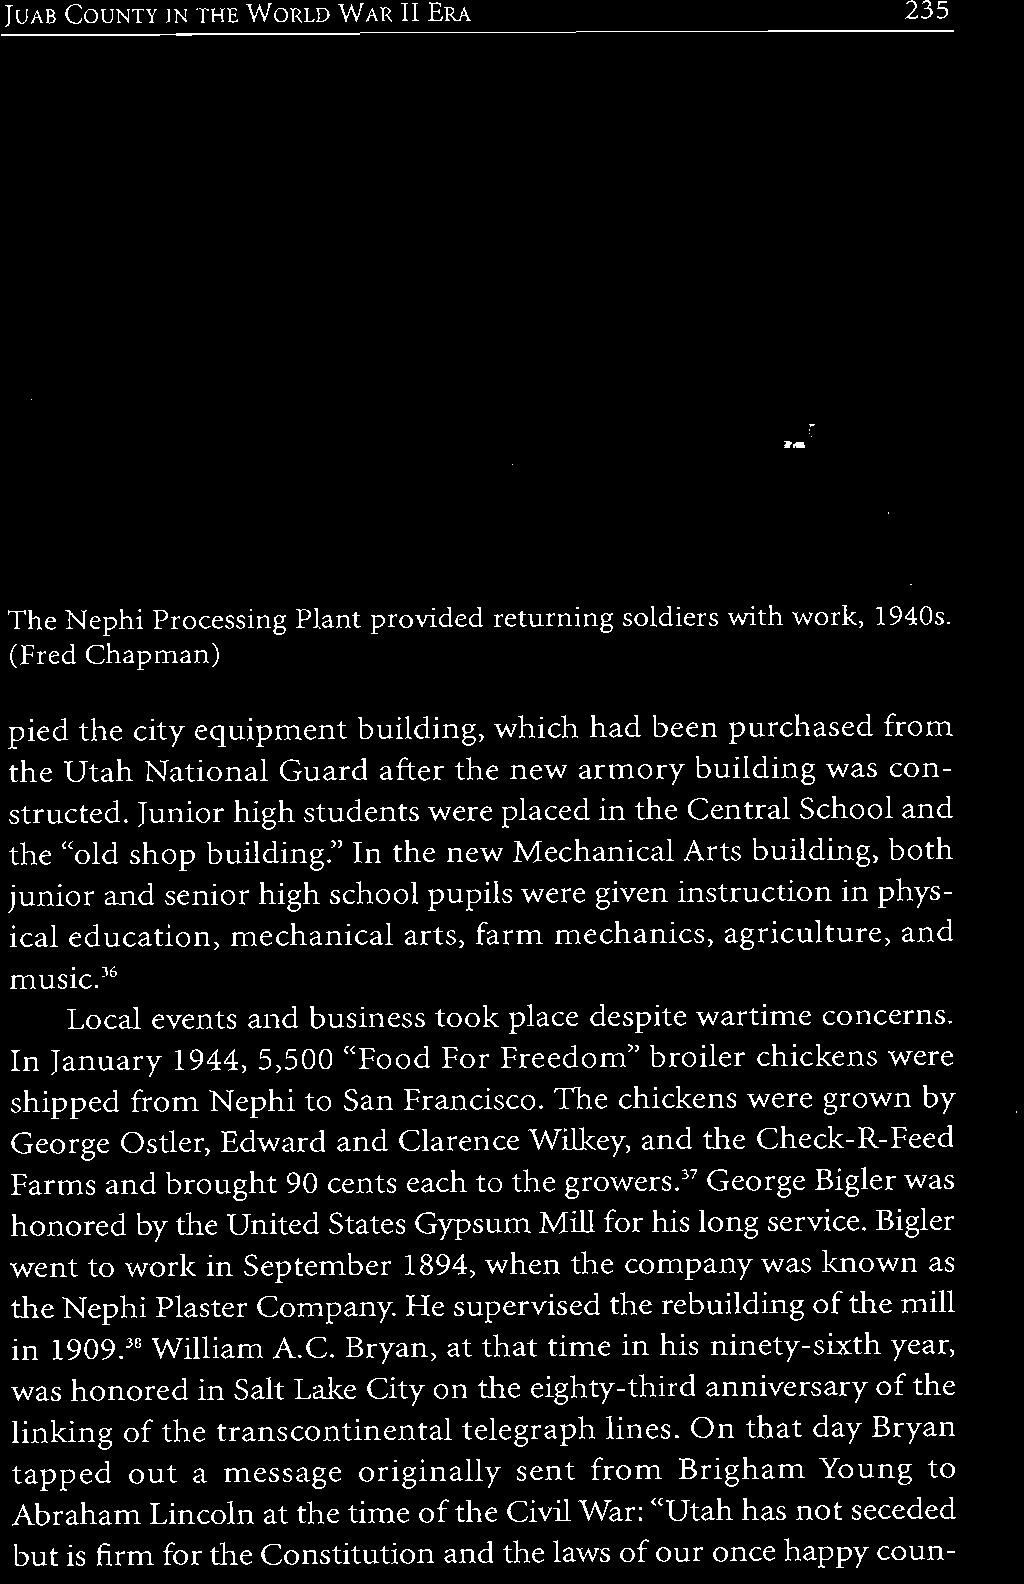 36 Local events and business took place despite wartime concerns. In January 1944, 5,500 "Food For Freedom" broiler chickens were shipped from Nephi to San Francisco.